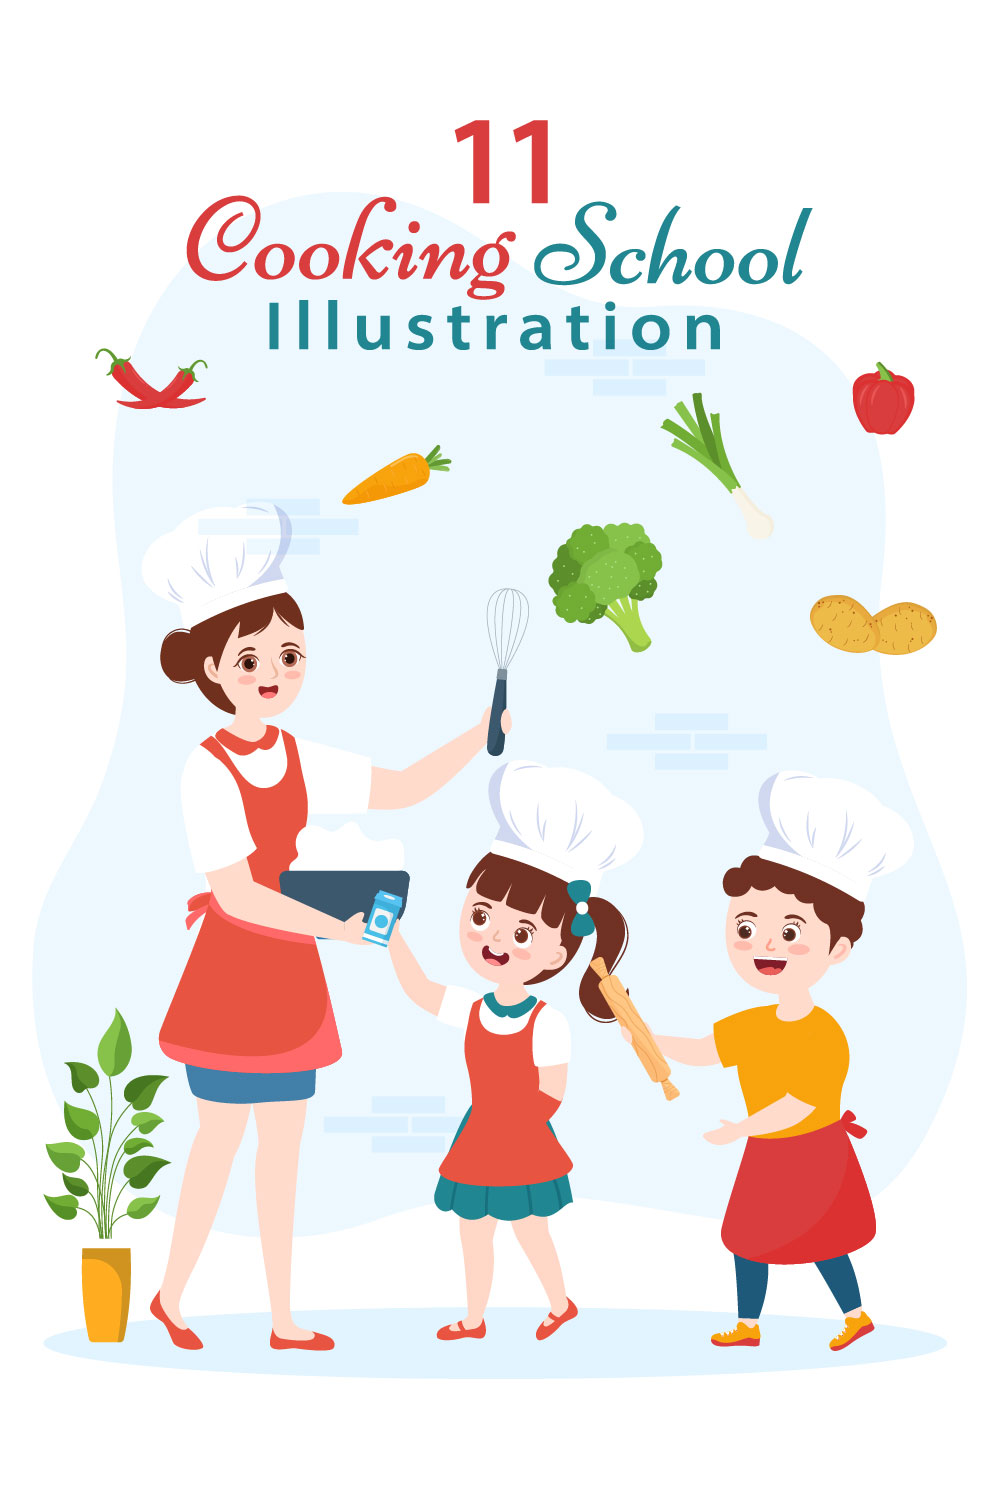 Gorgeous image with children being taught by the chef to cook.